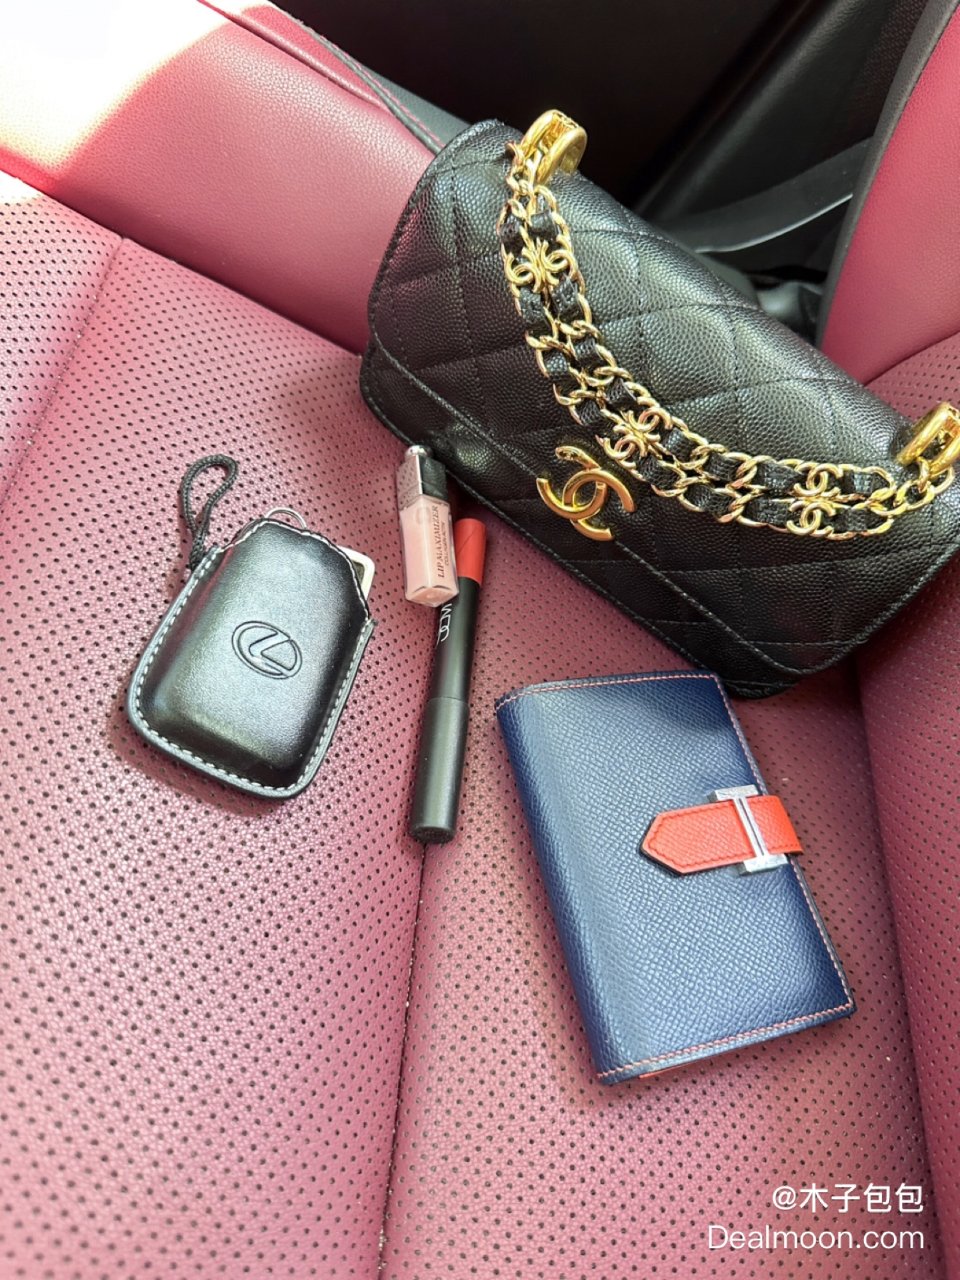 What’s in my bag 副驾驶...